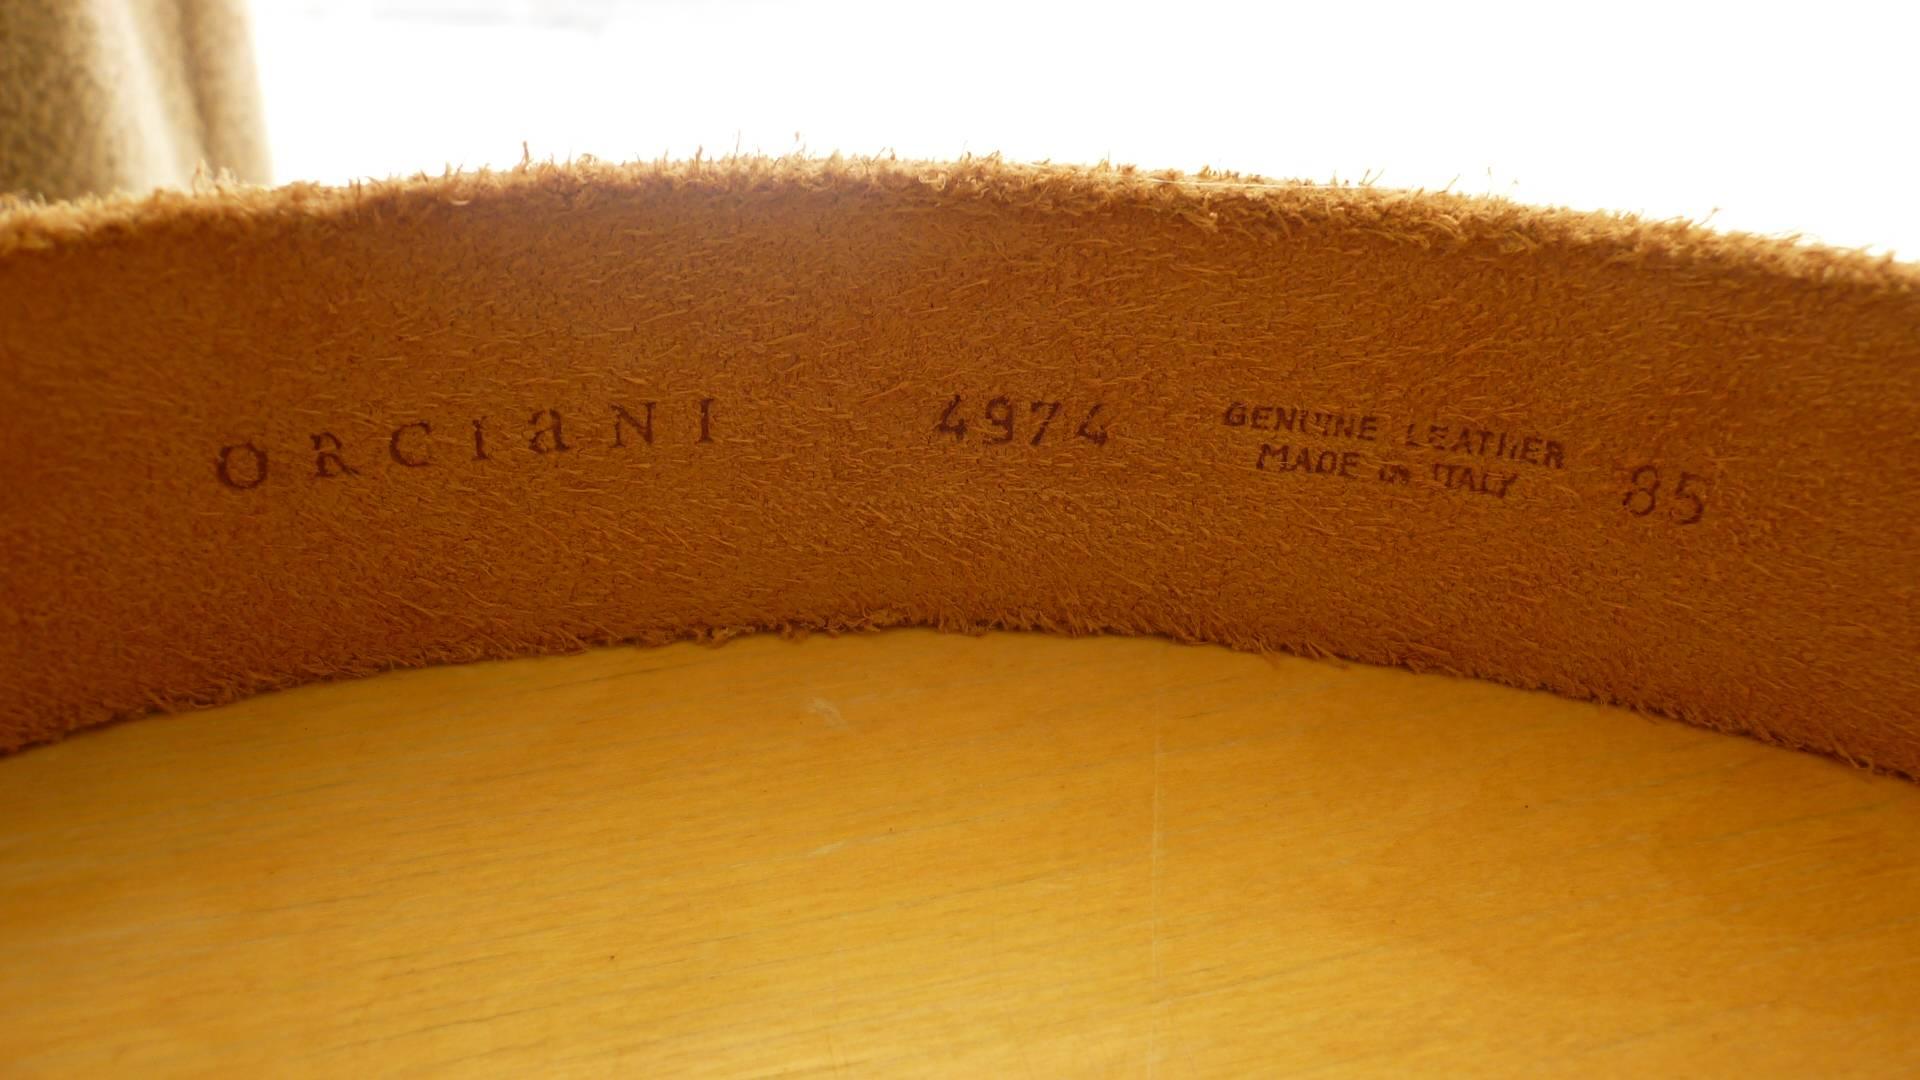 Brown Orciani Tan Leather Belt with Impressive Silver Tone Buckle